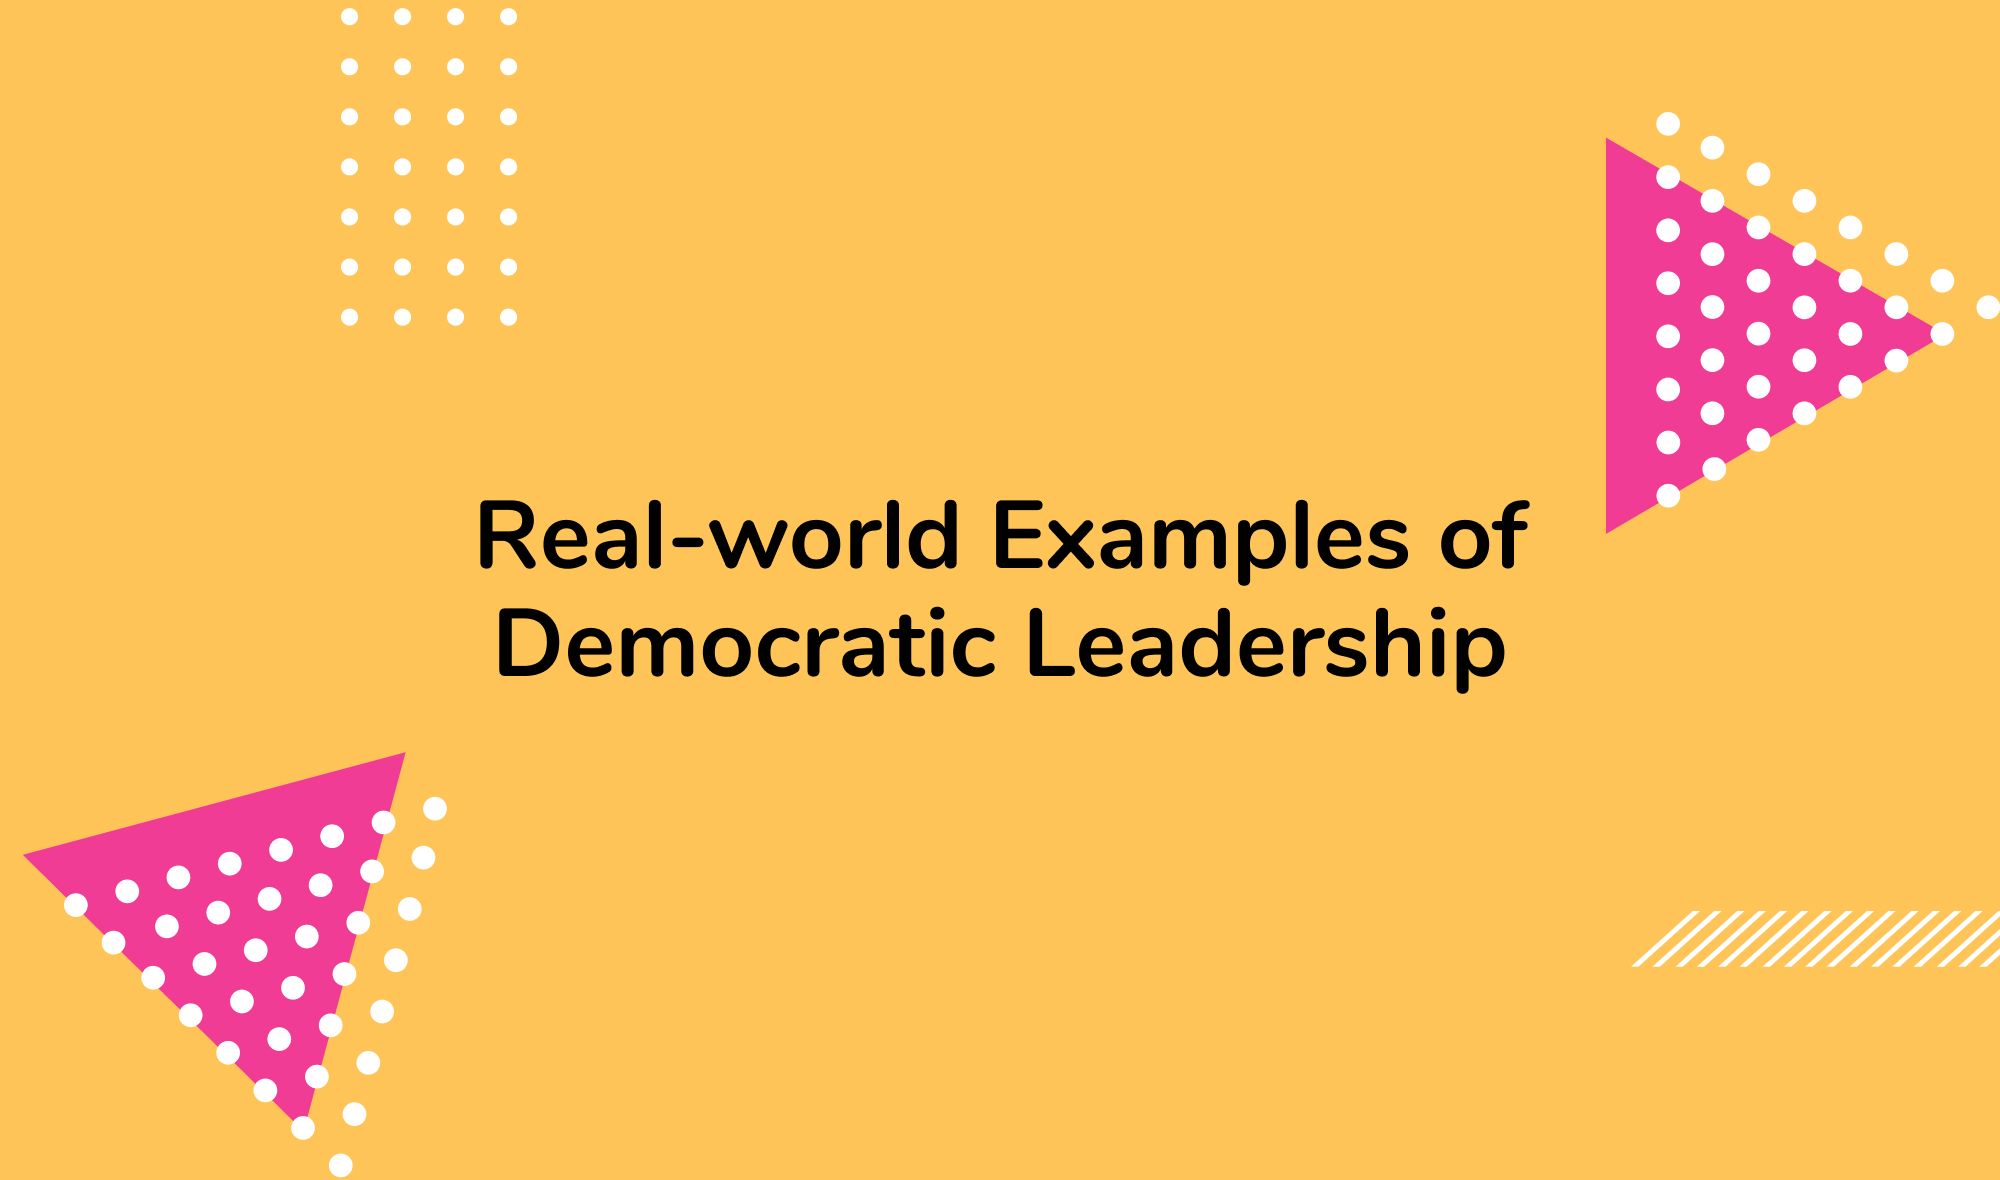 Real-world Examples of Democratic Leadership